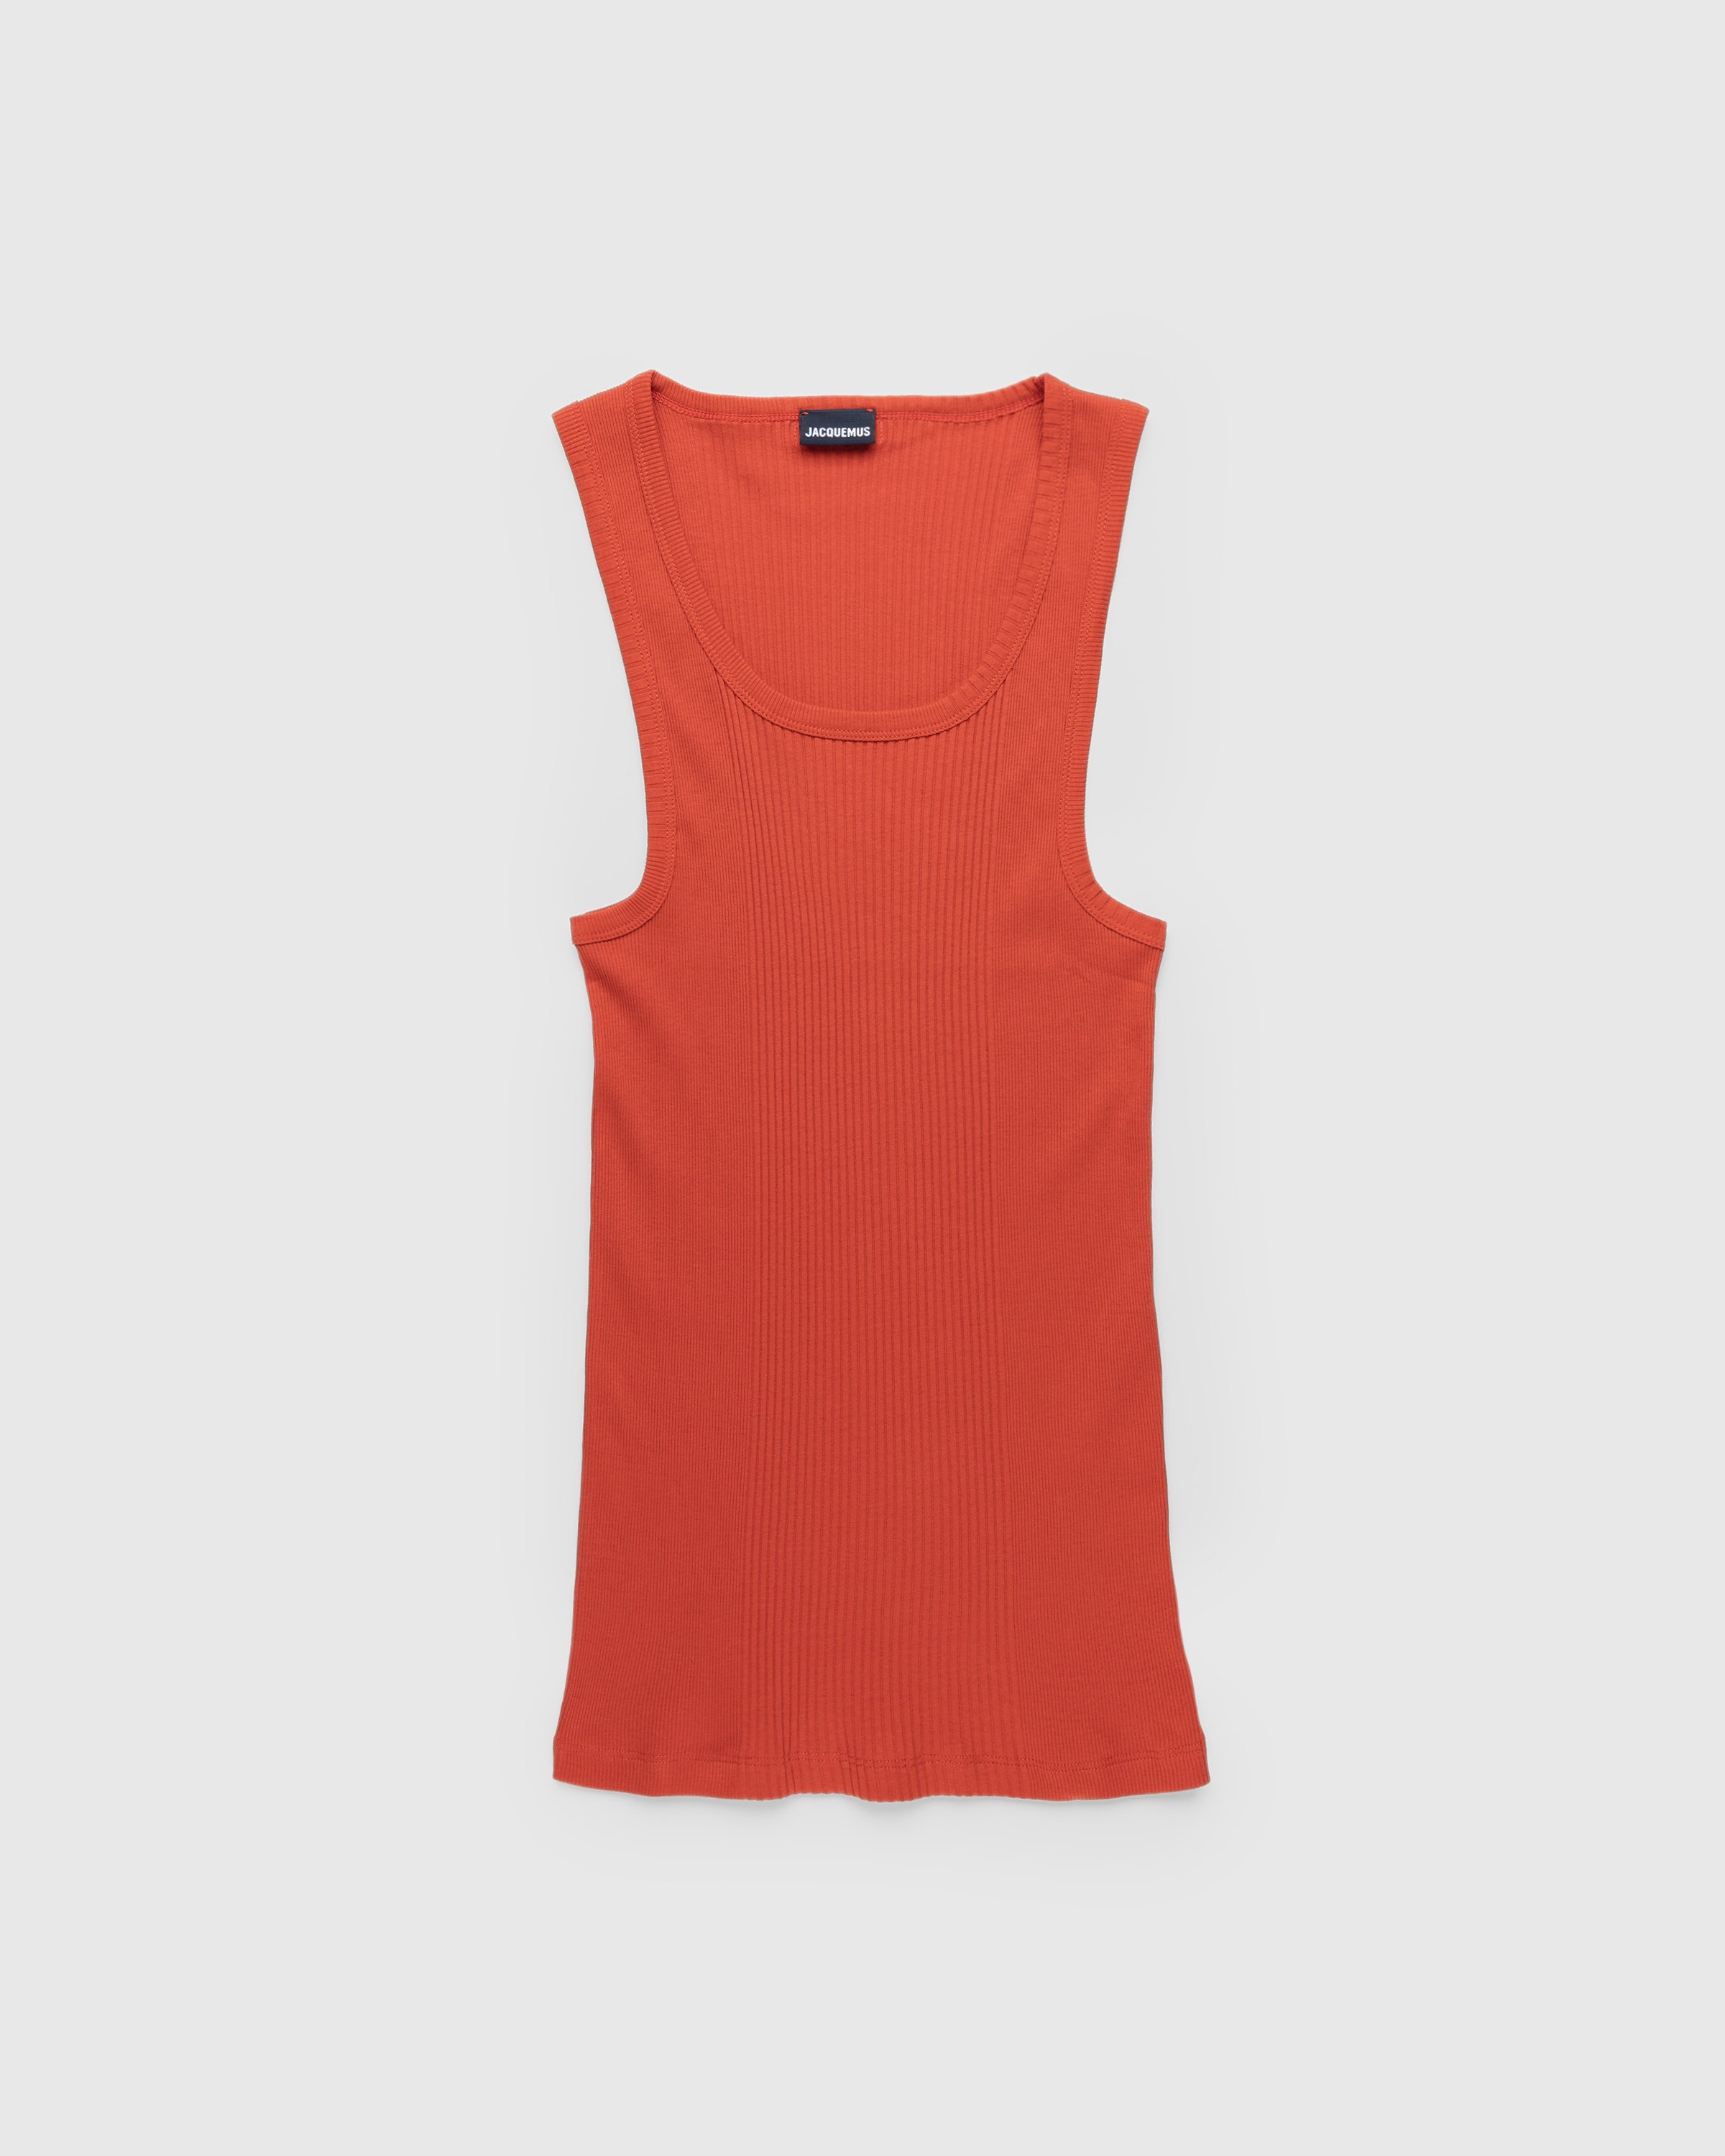 JACQUEMUS - Le Débardeur Caraco Red - Clothing - RED - Image 1